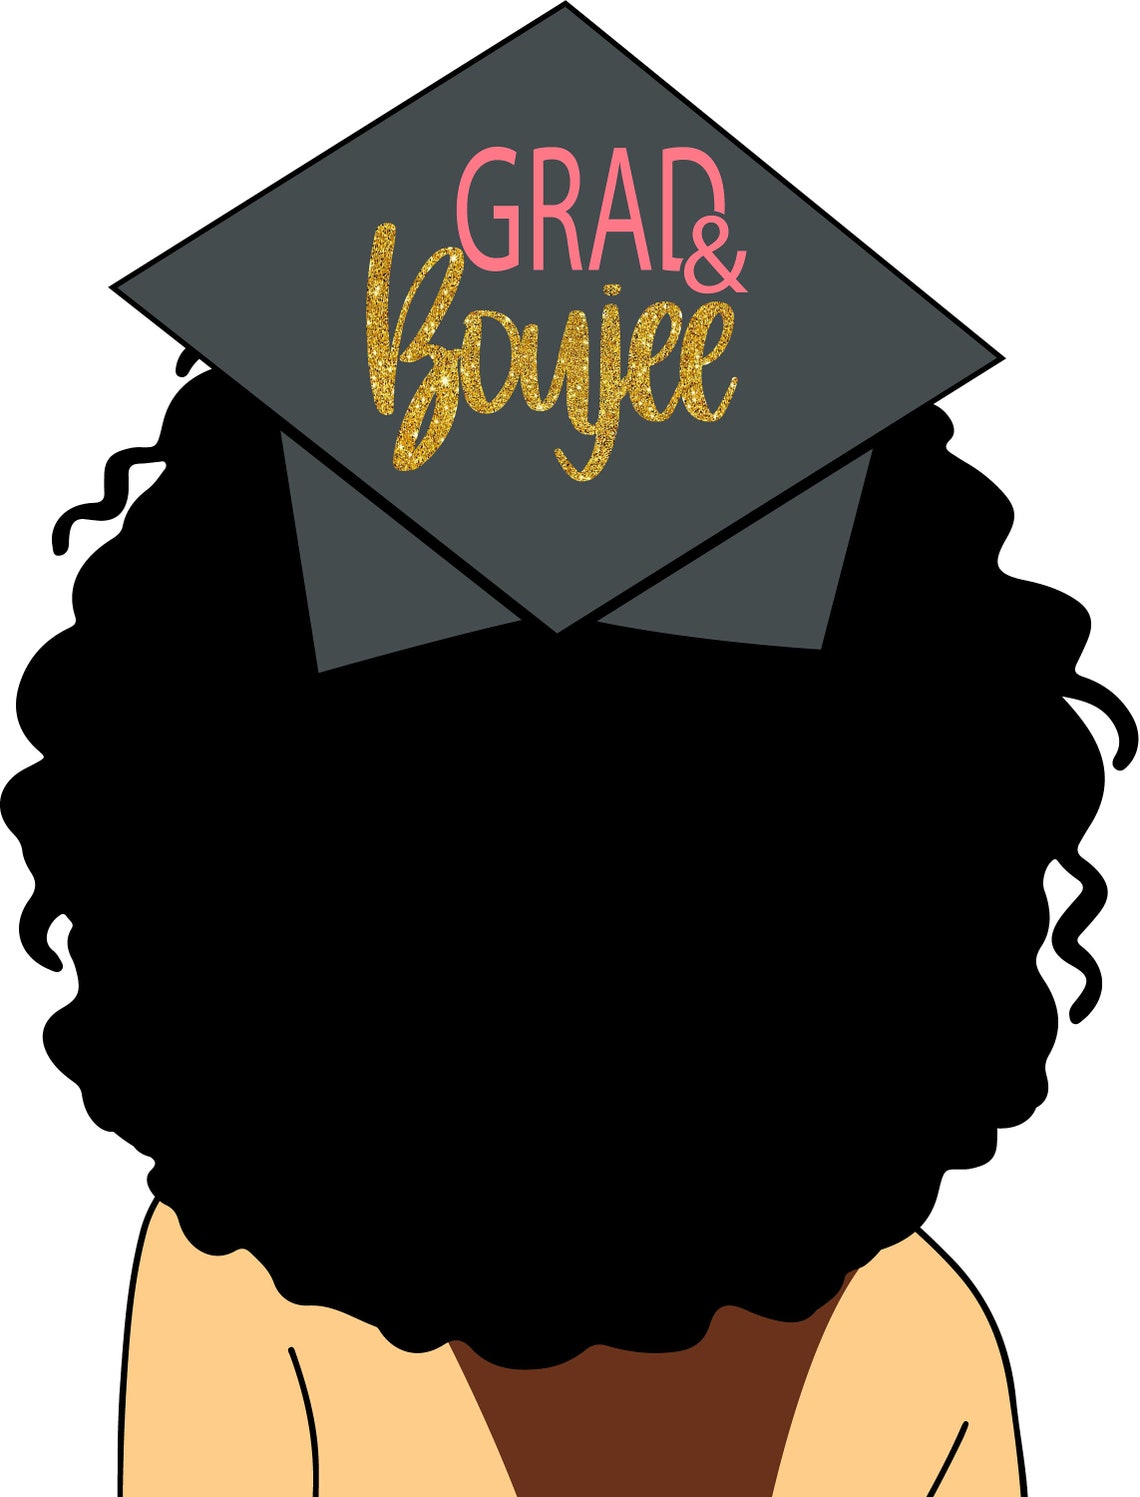 Download Nothing can stop me class of 2020 Black Woman SVG ...